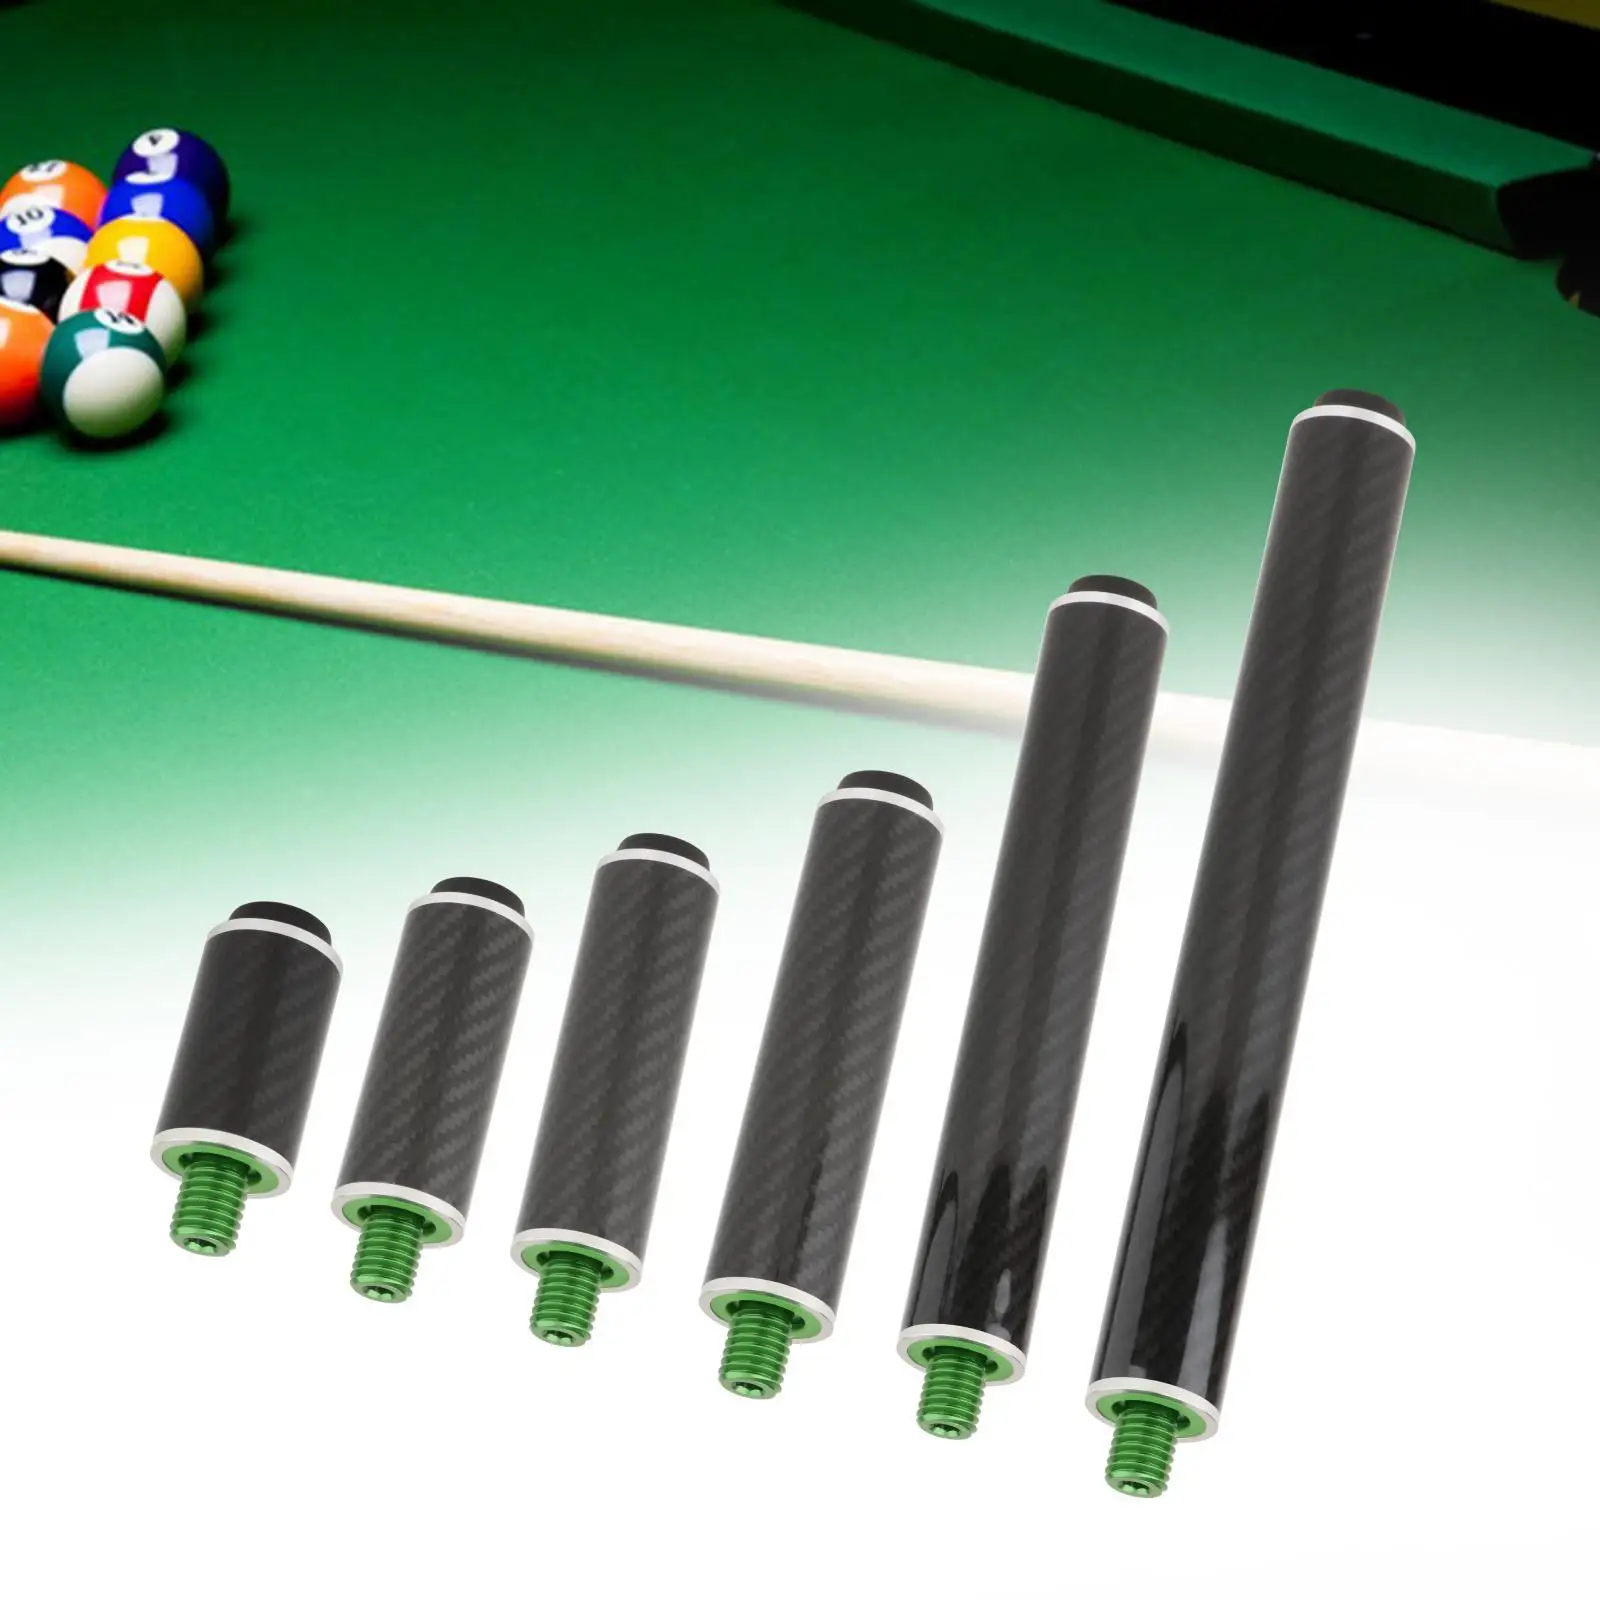 Billiards Pool Cue Extension, Dia 1.3in Pool Cue Weight Screw Snooker Cue Stick